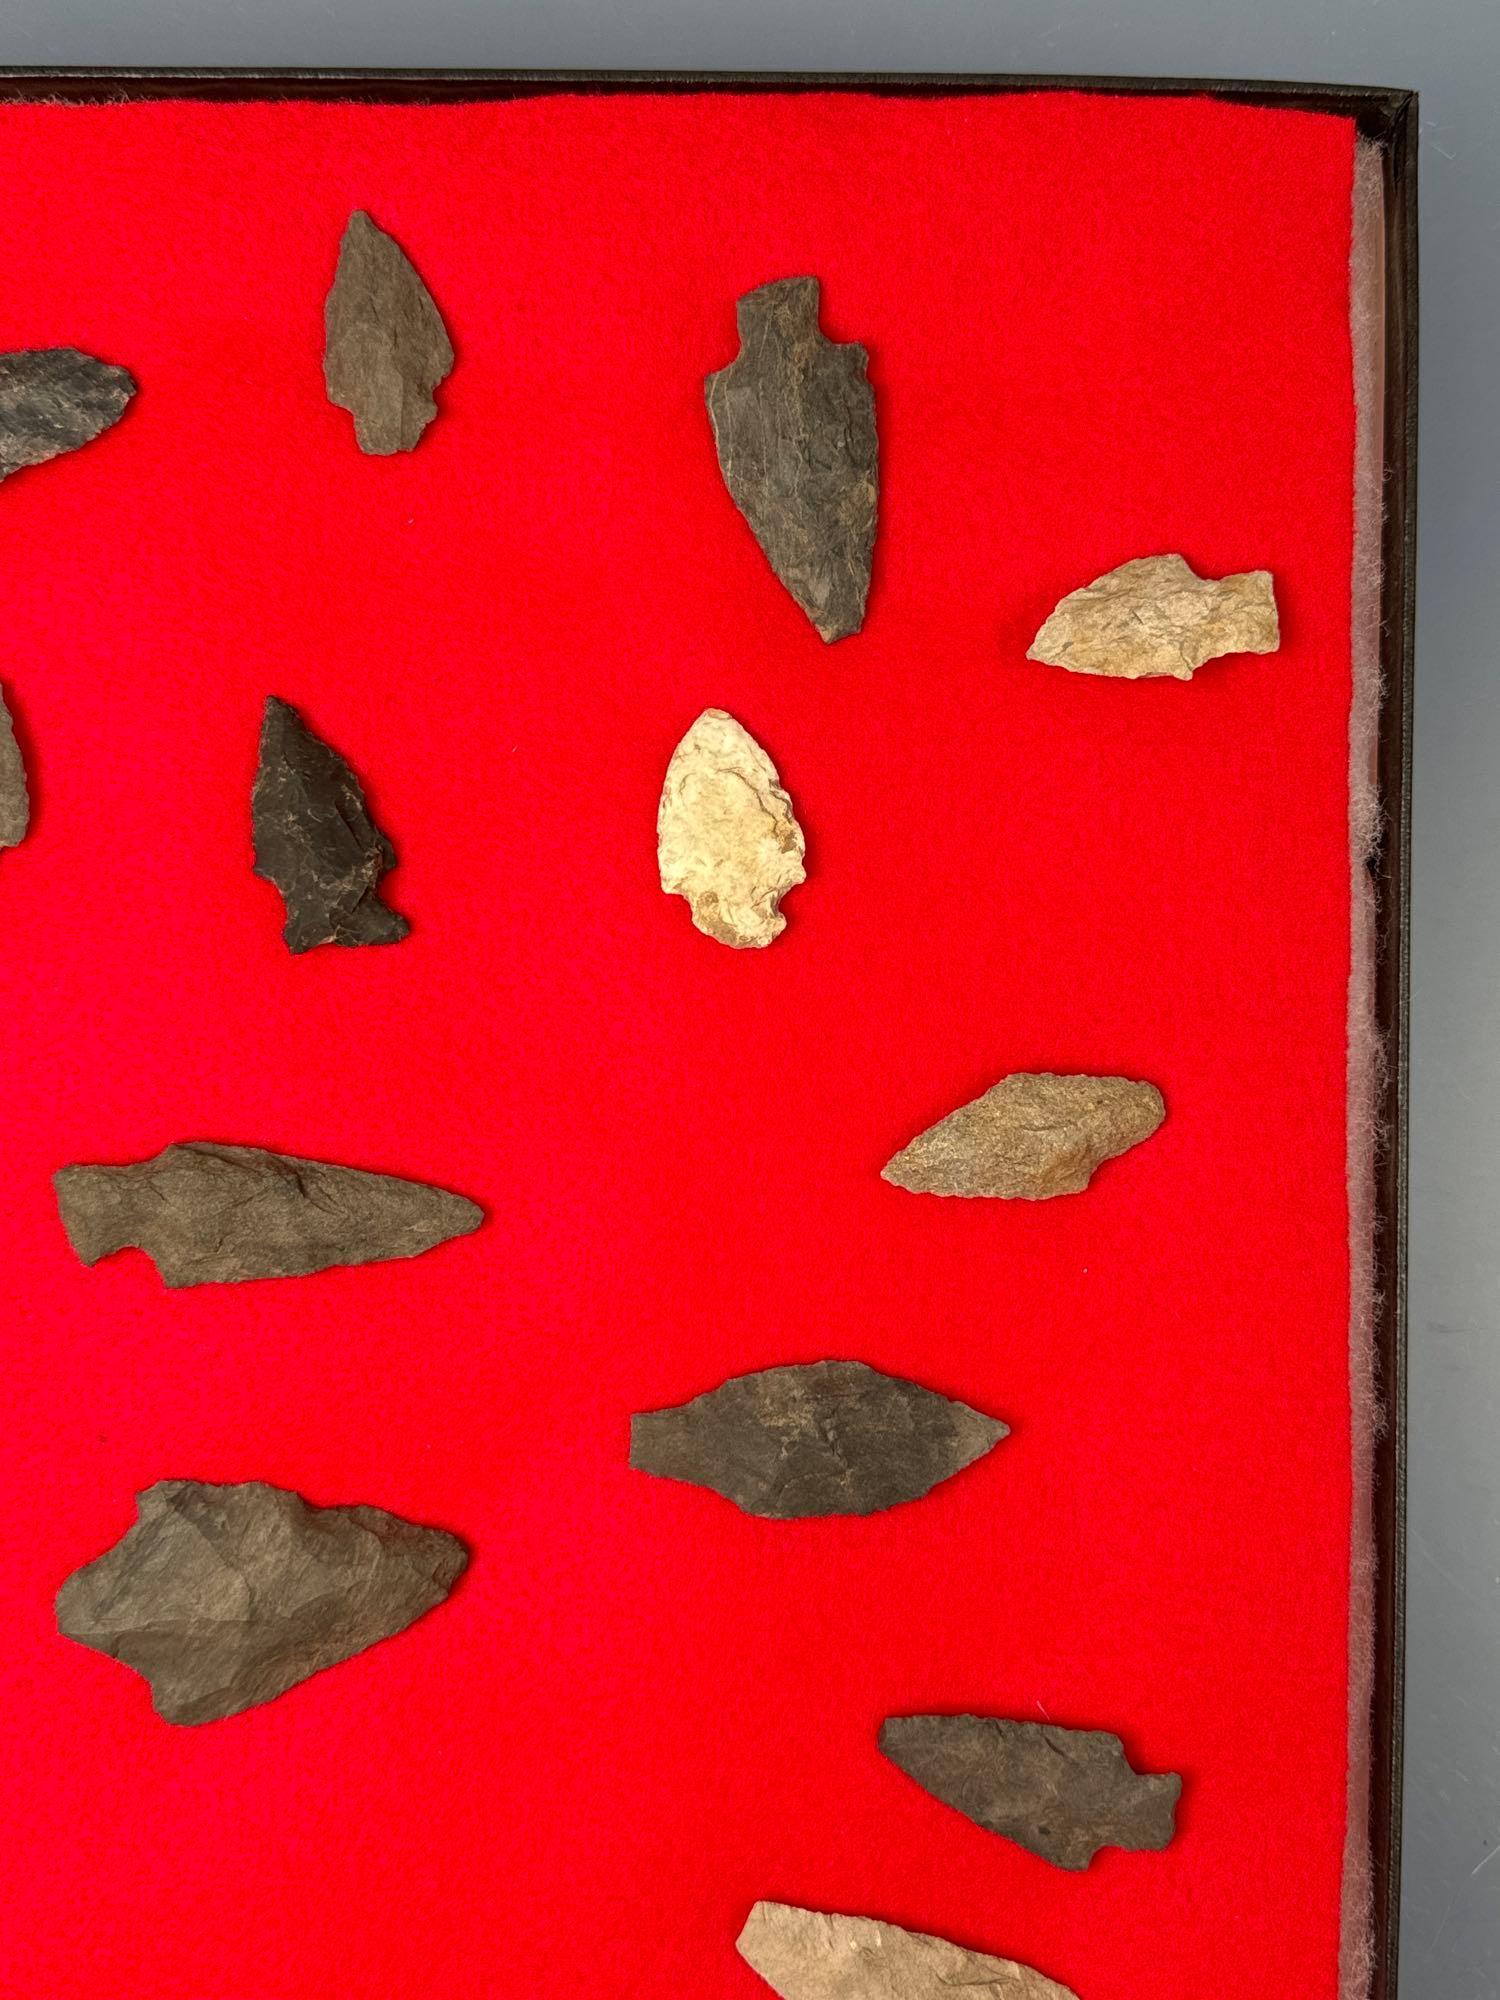 Lot of 23 Various Arrowheads, Longest is 3 5/16", Found in Jim Thorpe Area in Pennsylvania